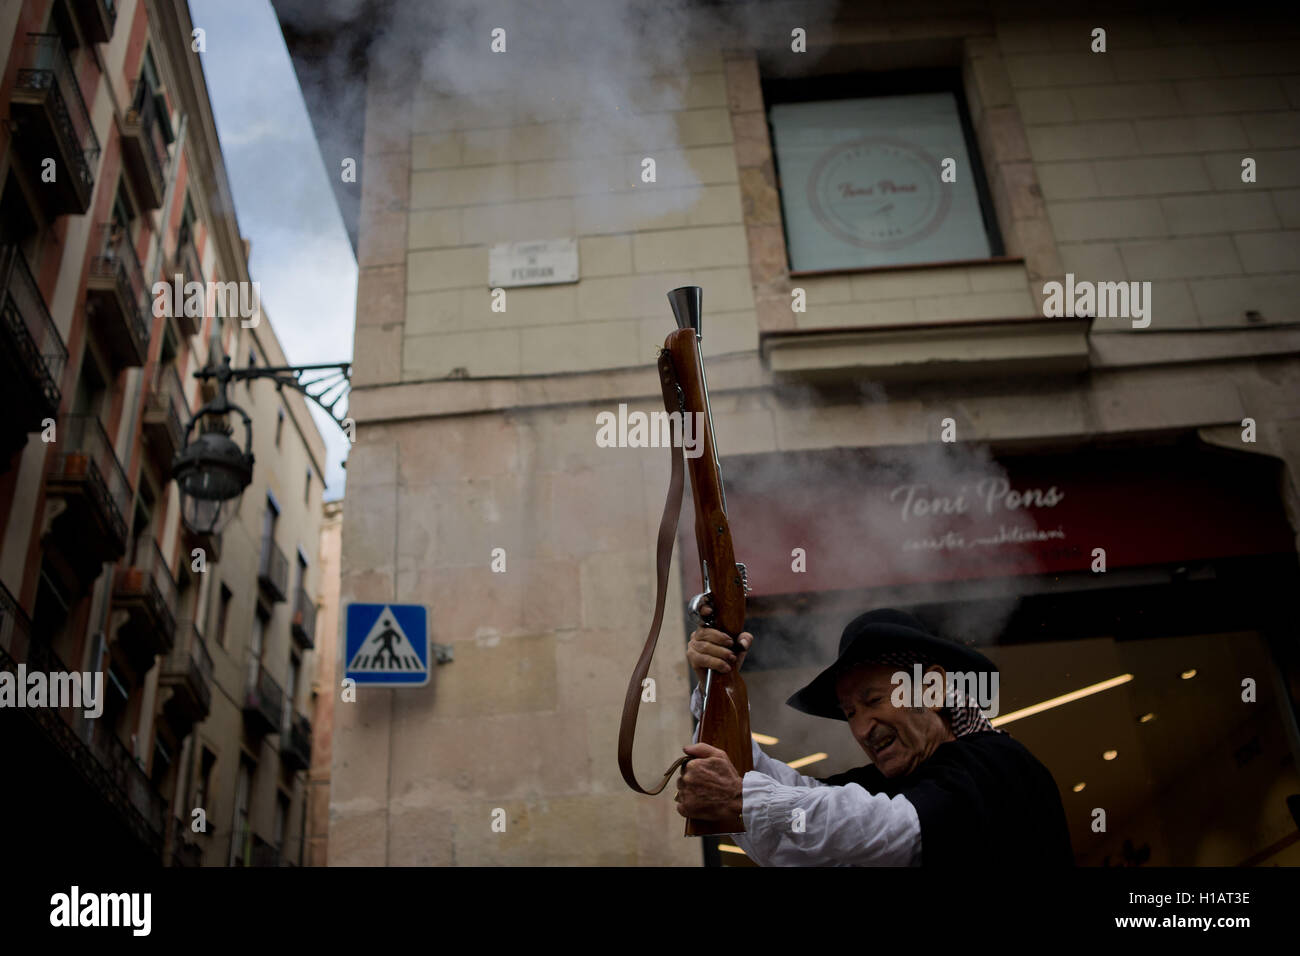 Barcelona, Catalonia, Spain. 24th Sep, 2016. A trabucaires shoot his blunderbuss early in the morning through the streets of Barcelona on the occasion of the celebrations of the Merce Festival (Festes de la Merce). The Galejada Trabucaire marks the beginning of the day of the patron saint of Barcelona, La Merce. Men and women dressed as ancient Catalan bandits take to the streets of the old part of Barcelona and cause a loud noise with his blunderbusses full of gunpowder. © Jordi Boixareu/ZUMA Wire/Alamy Live News Stock Photo